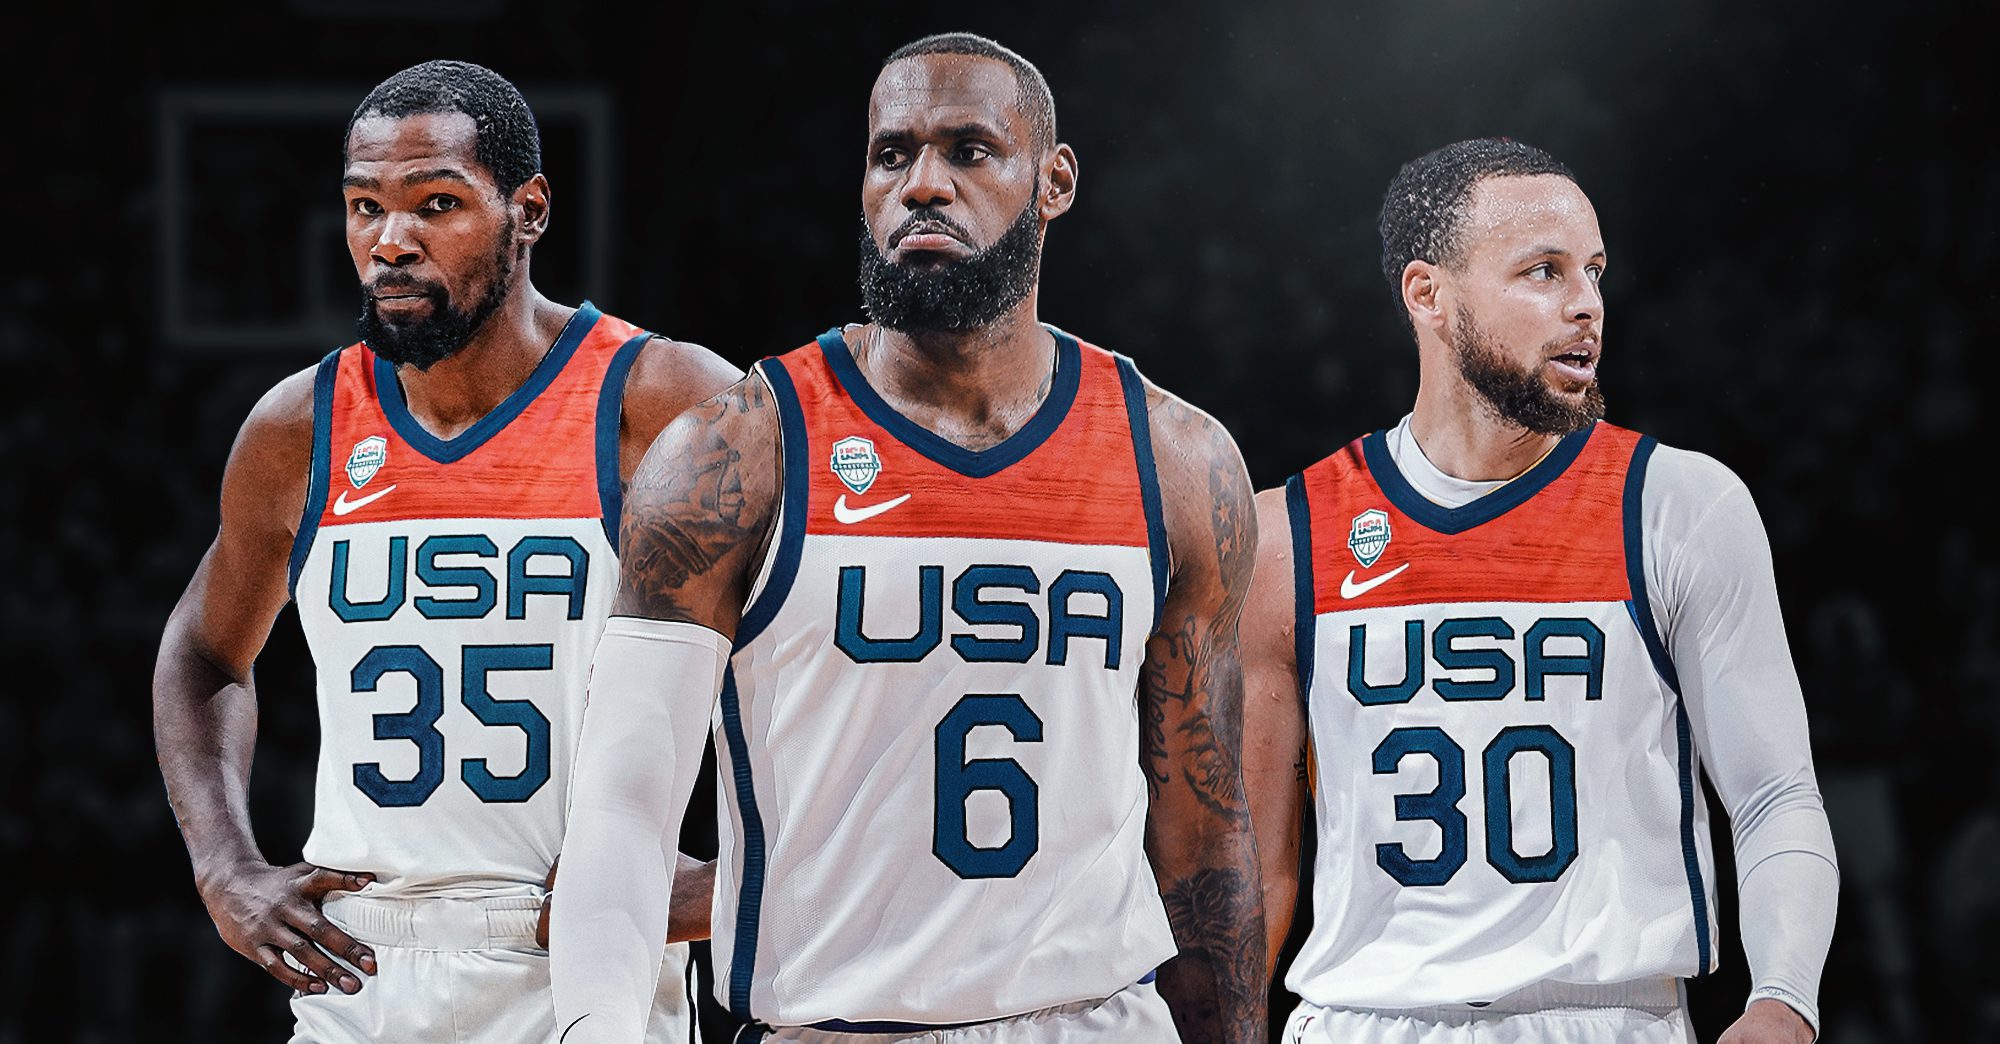 USA is getting ready for the 2024 Olympics by revealing this recent roster